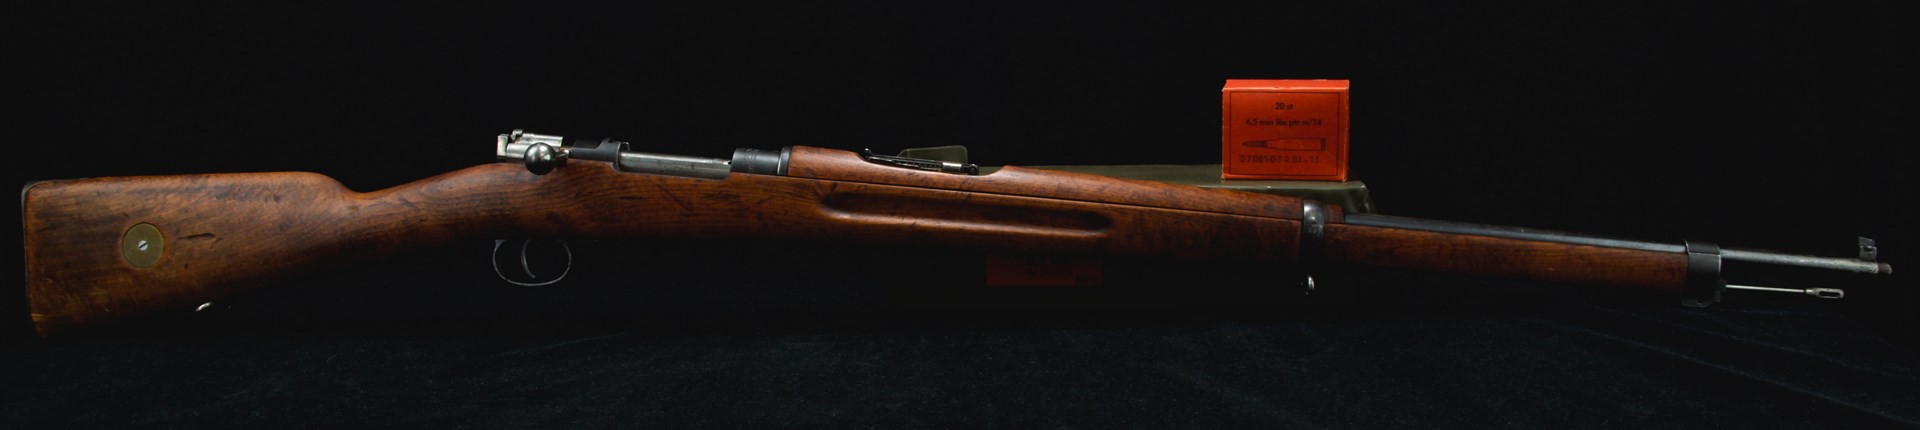 Right-side view of bolt-action m1896 swedish mauser rifle with ammunition box black background wood stock gun military surplus